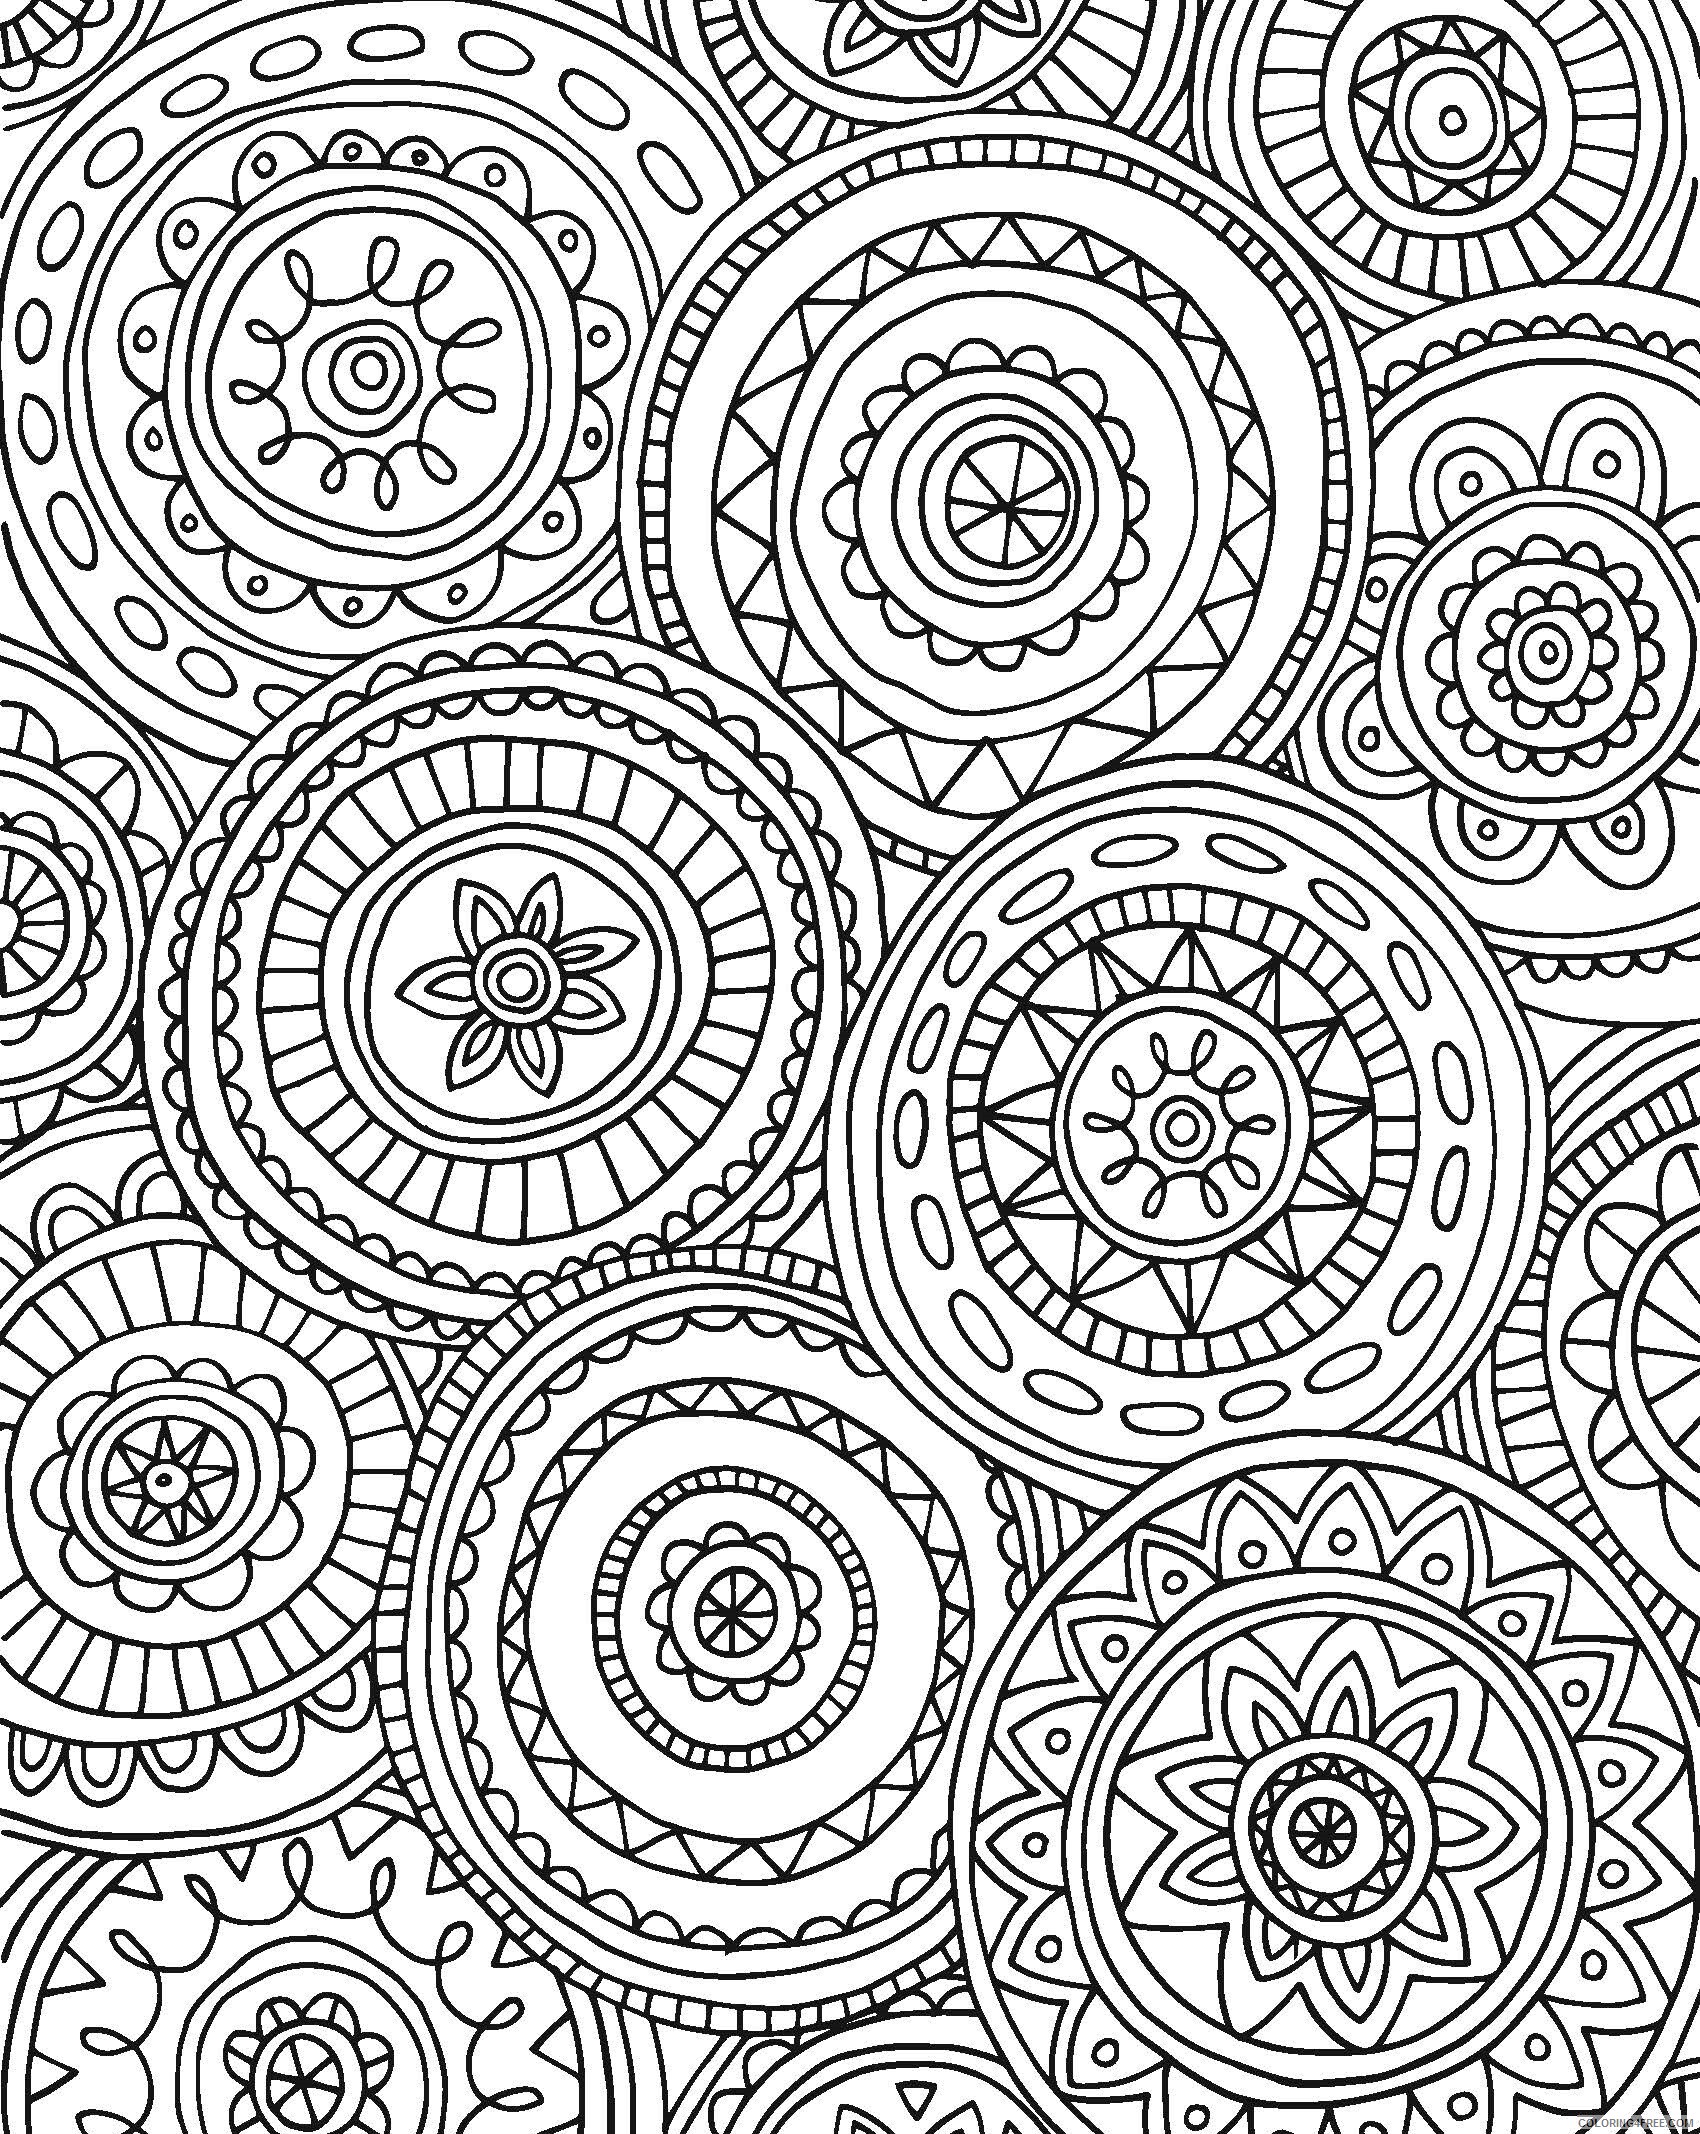 Adult Coloring Pages Mandalas Printable Sheets 19 of the Best Colouring 2021 a 1987 Coloring4free